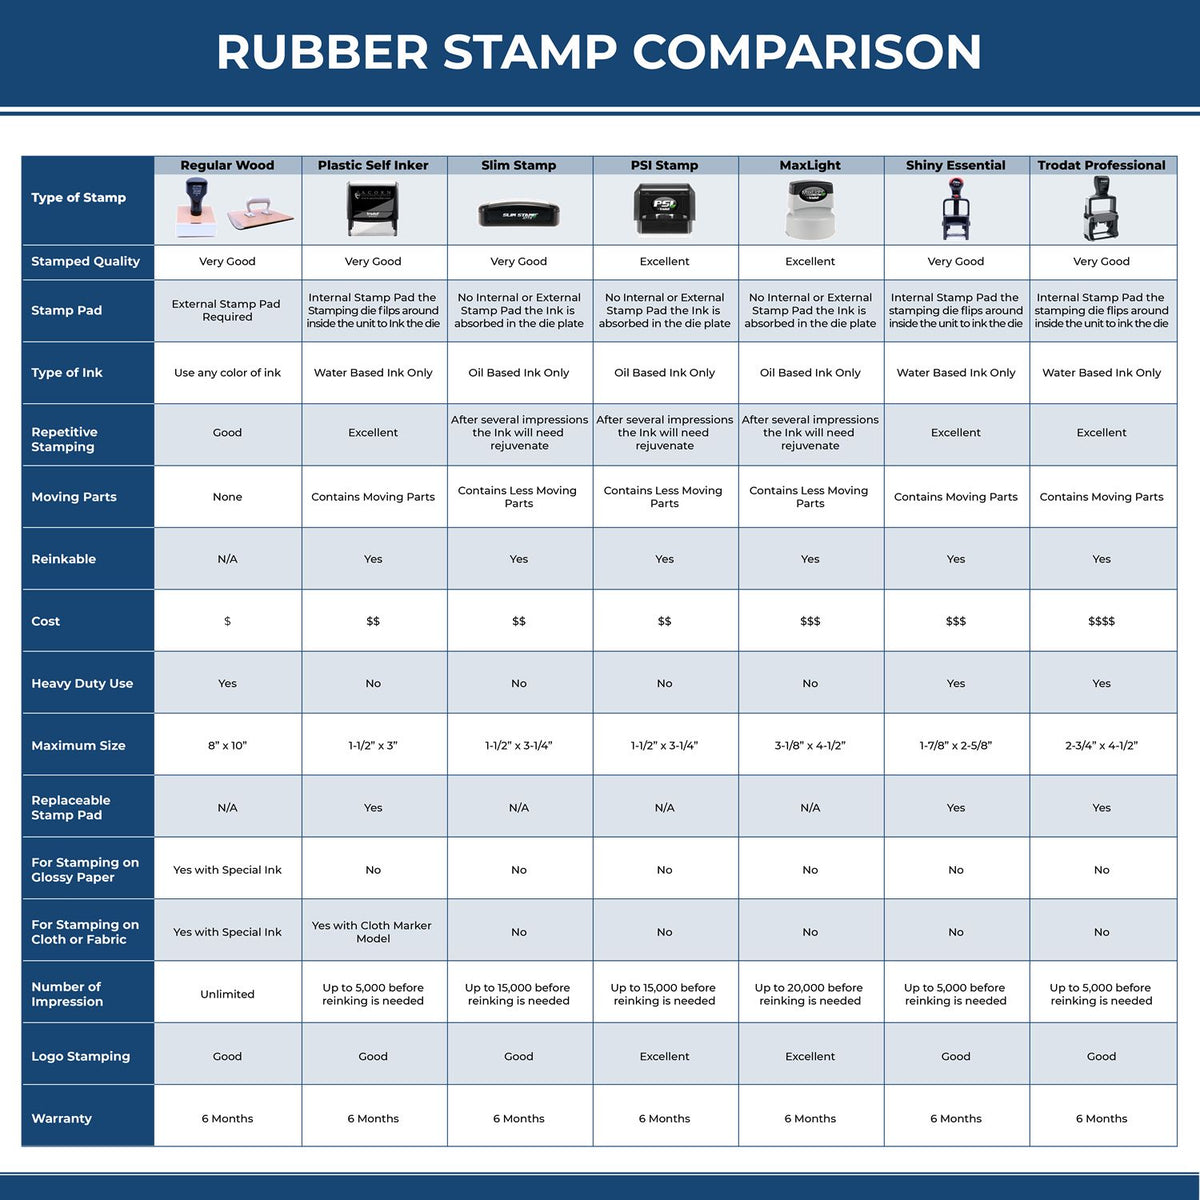 Large Two Thumbs Up Rubber Stamp 4674R Rubber Stamp Comparison